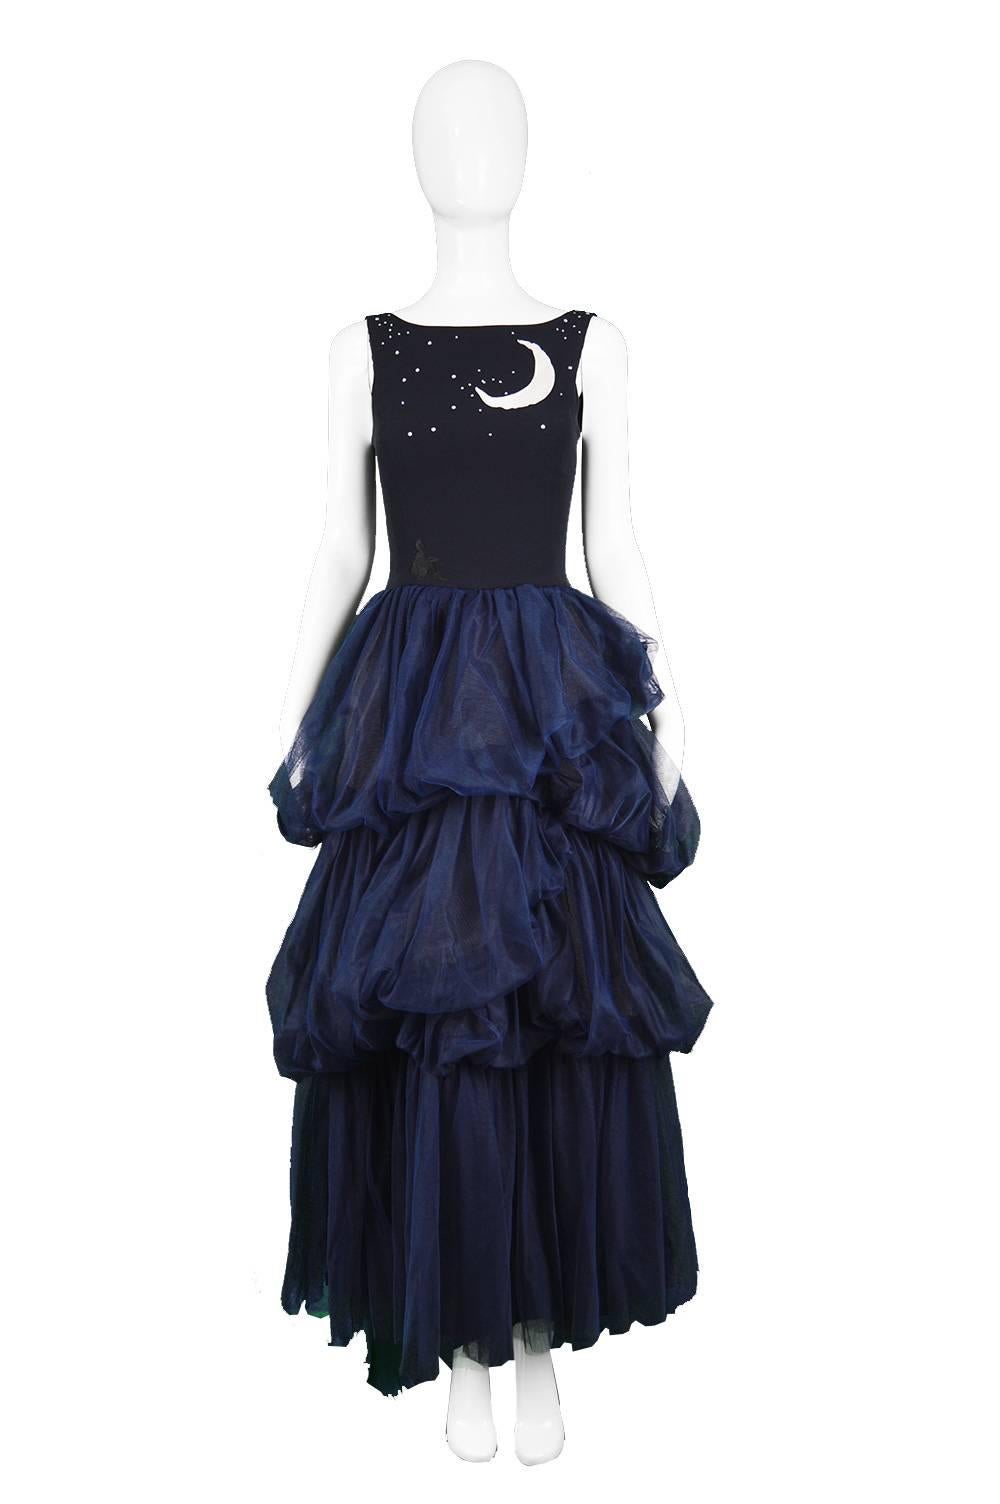 Moschino Vintage Midnight Blue Crepe & Tulle Embroidered Gown, 1990s

Size: UK 8/ US 4/ EU 36. Please check measurements.
Bust - 32” / 81cm
Underbust - 28” / 71cm
Shoulder to Waist - 15” / 38cm
Waist - 26” / 66cm
Hips - Up to 46” / 117cm
Length